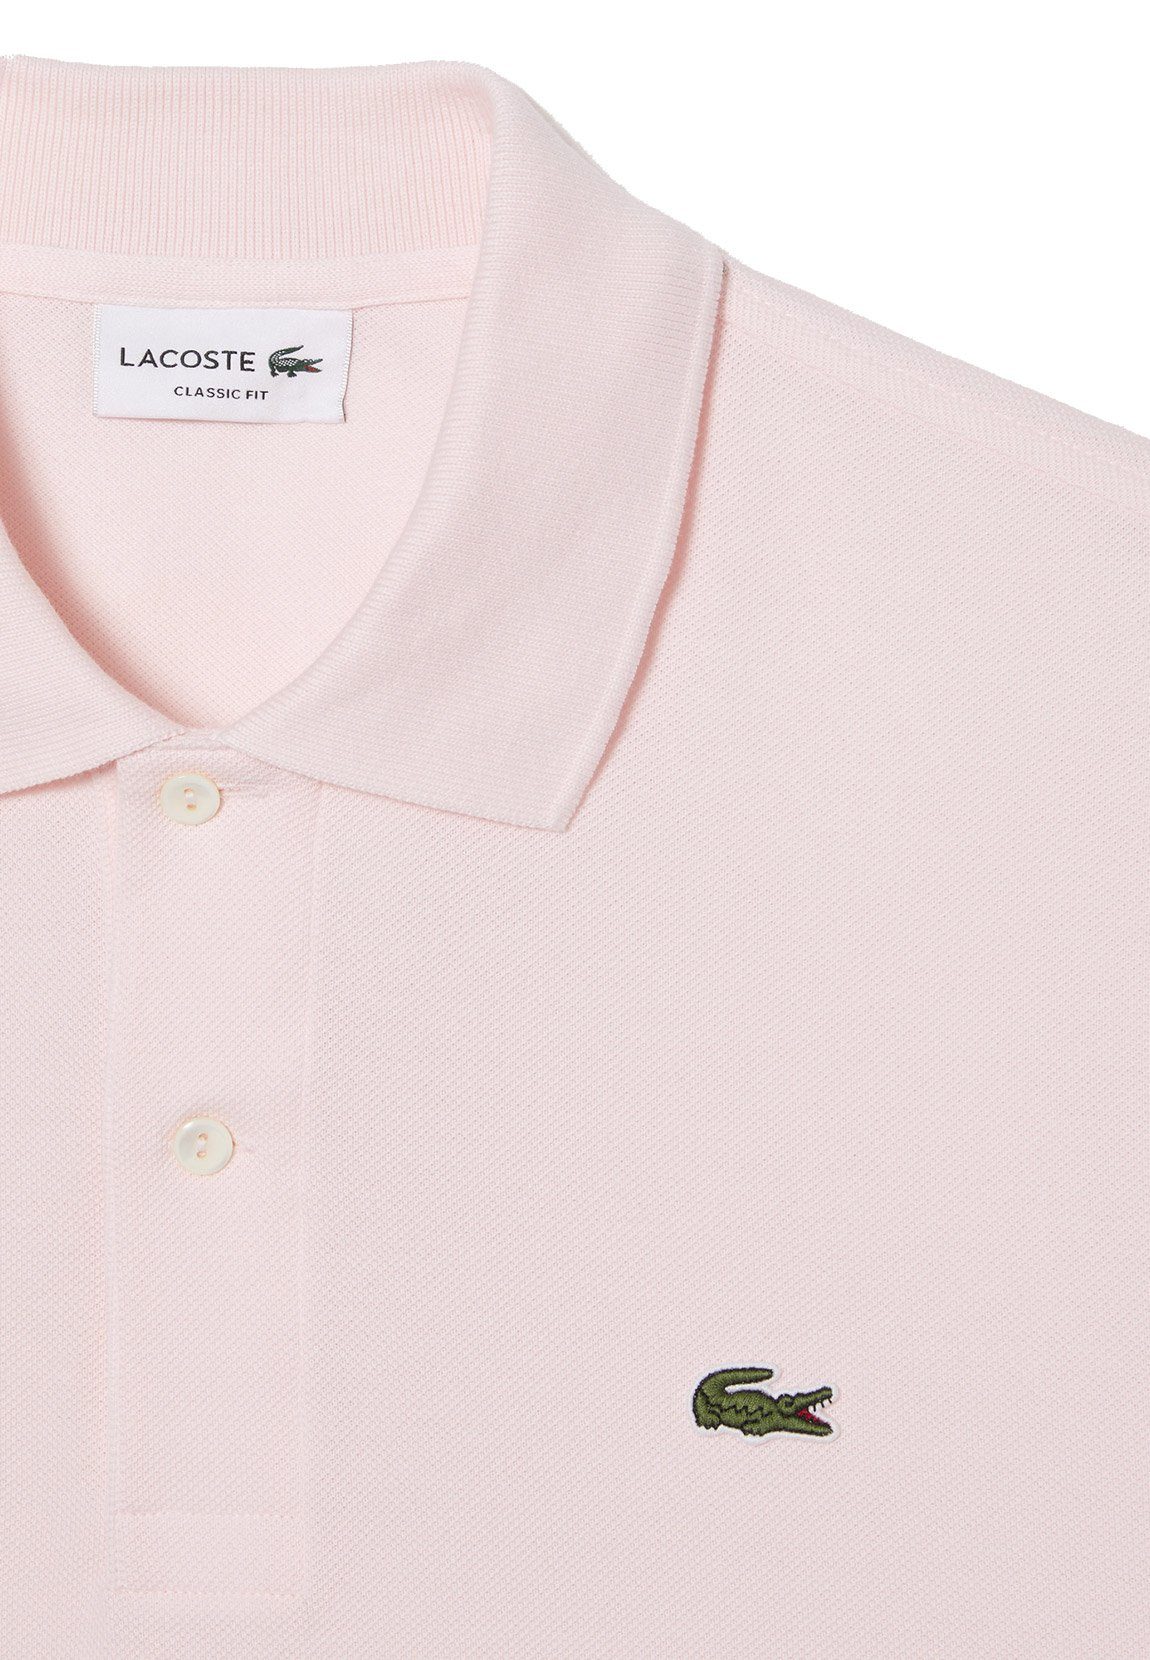 RIBBED Poloshirt Rosa SLEEVED Polo COLLAR SHORT L1212 Pale Rose Lacoste Lacoste hellrosa SHIRT